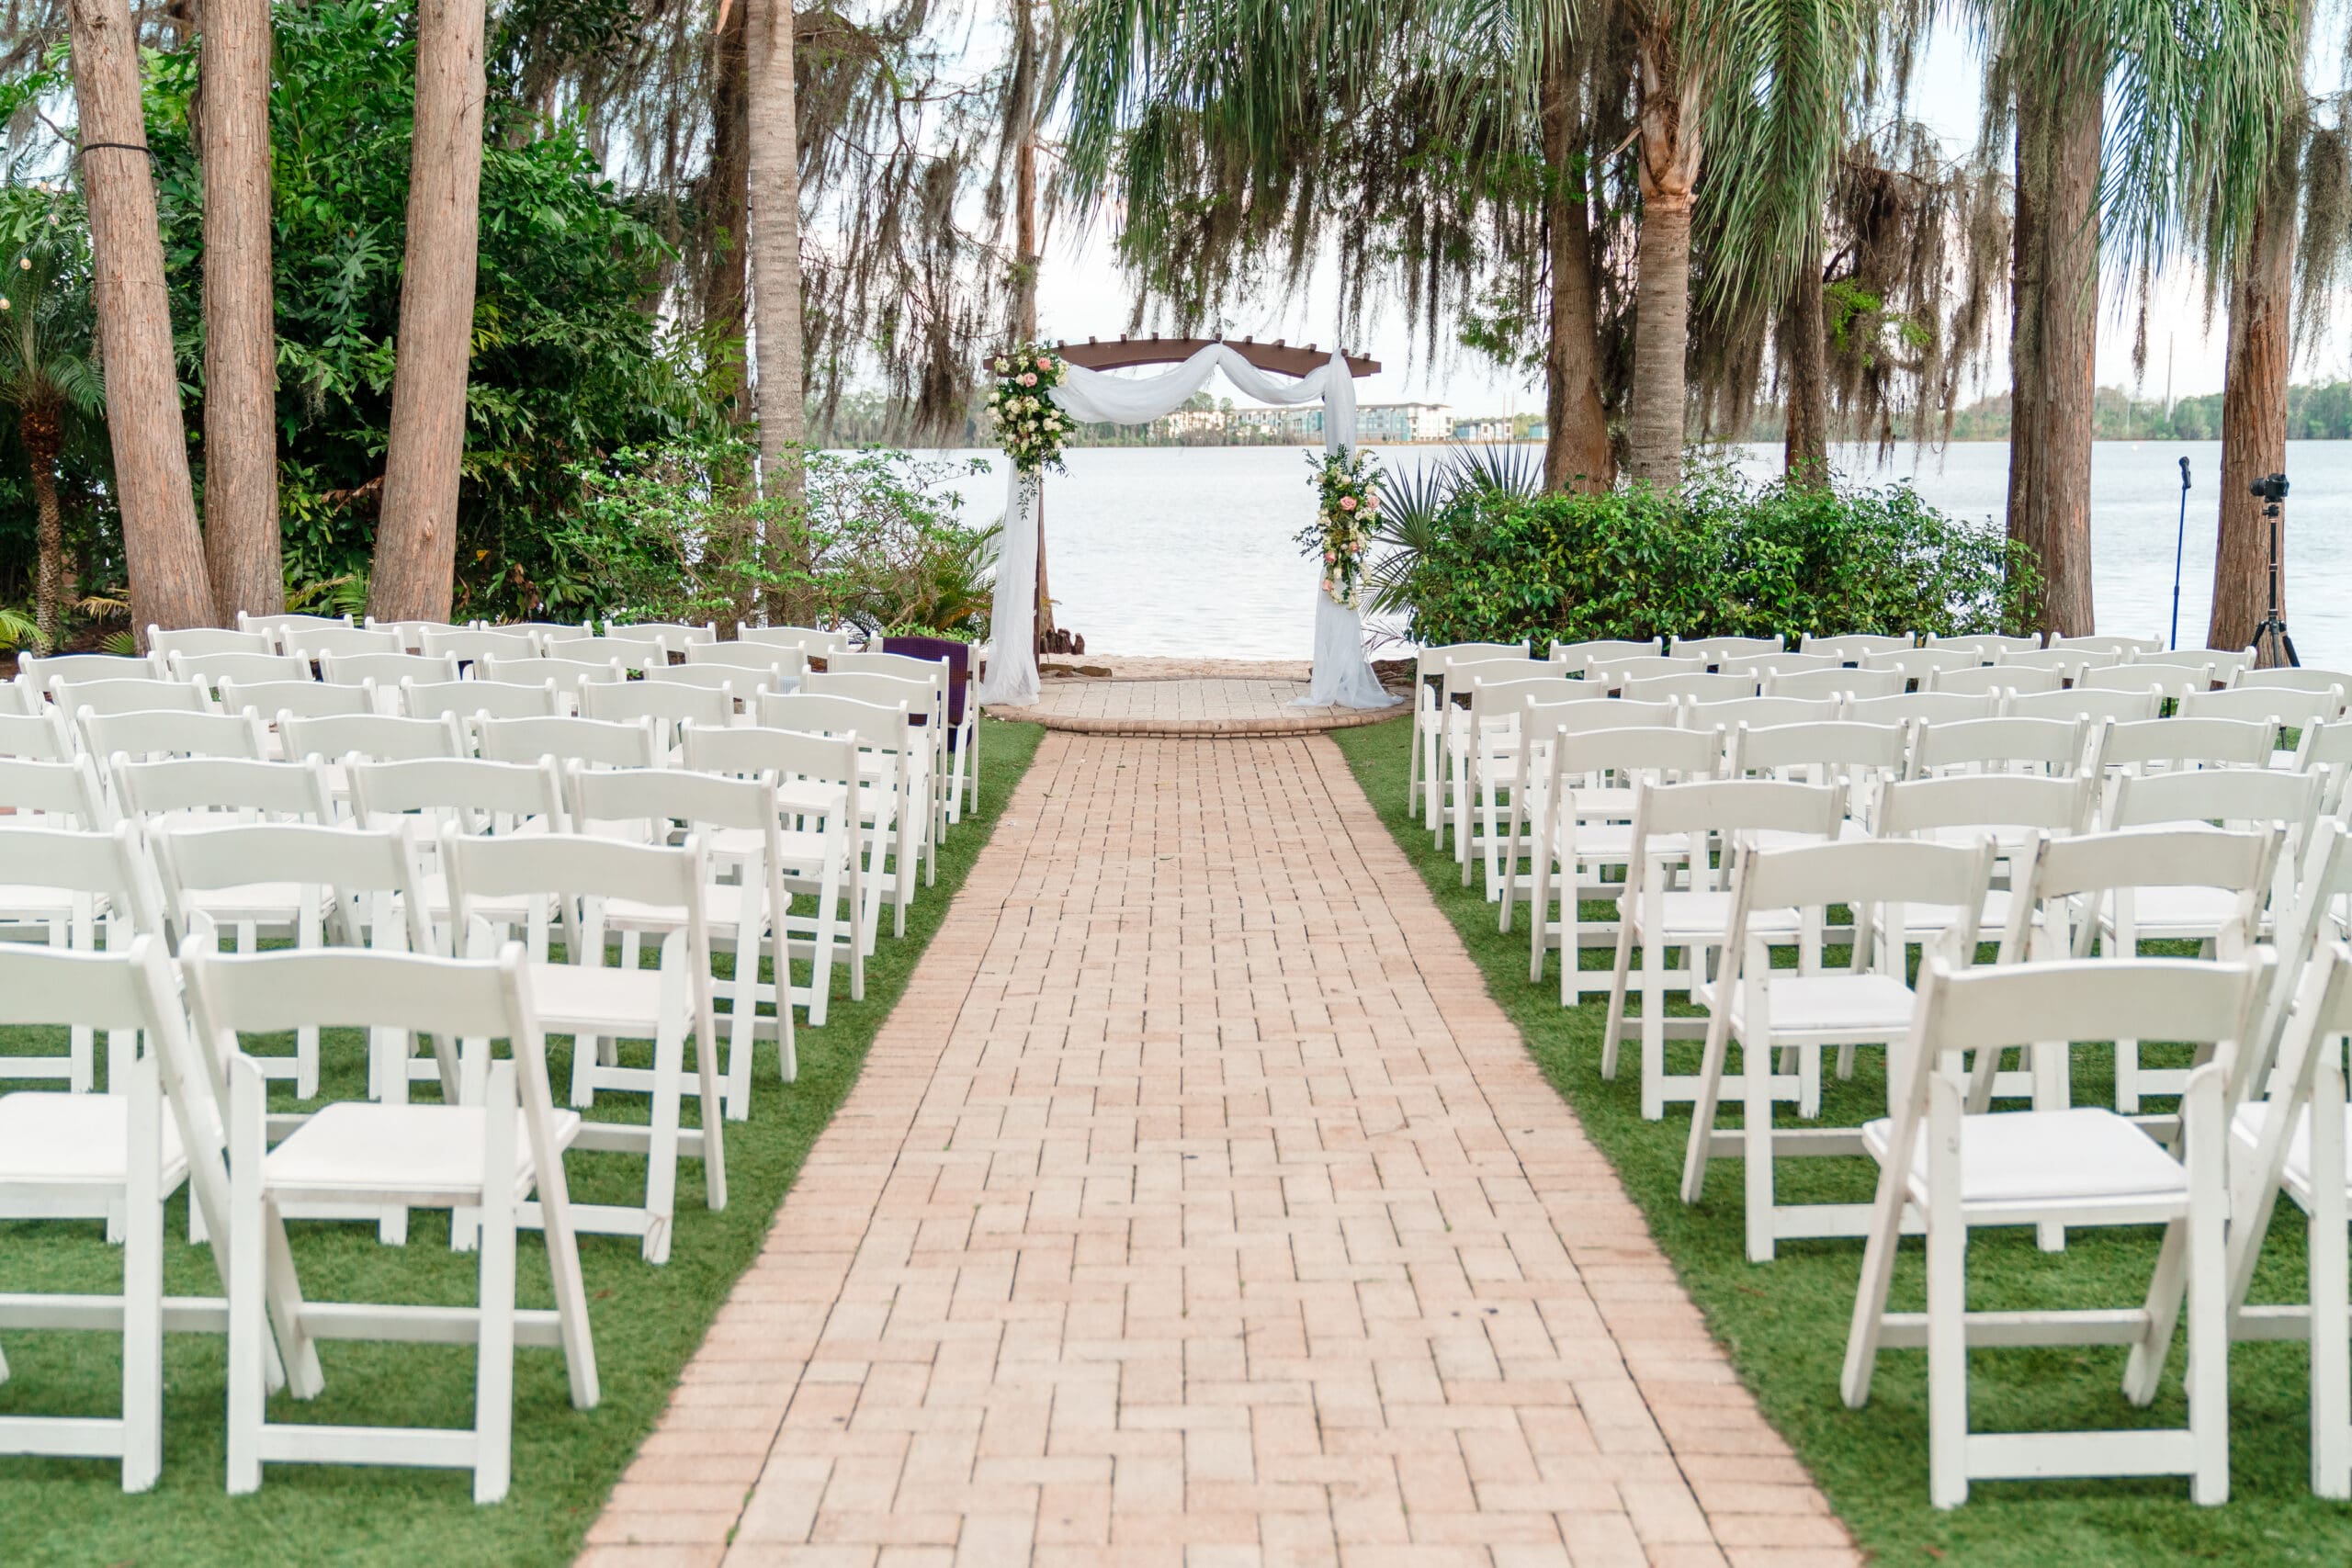 Empty outdoor ceremony area at Paradise Cove Wedding, showcasing white chairs for guests, an elegant altar draped with white drapes and adorned with flowers, with palm trees on each side, and clear water in the background.